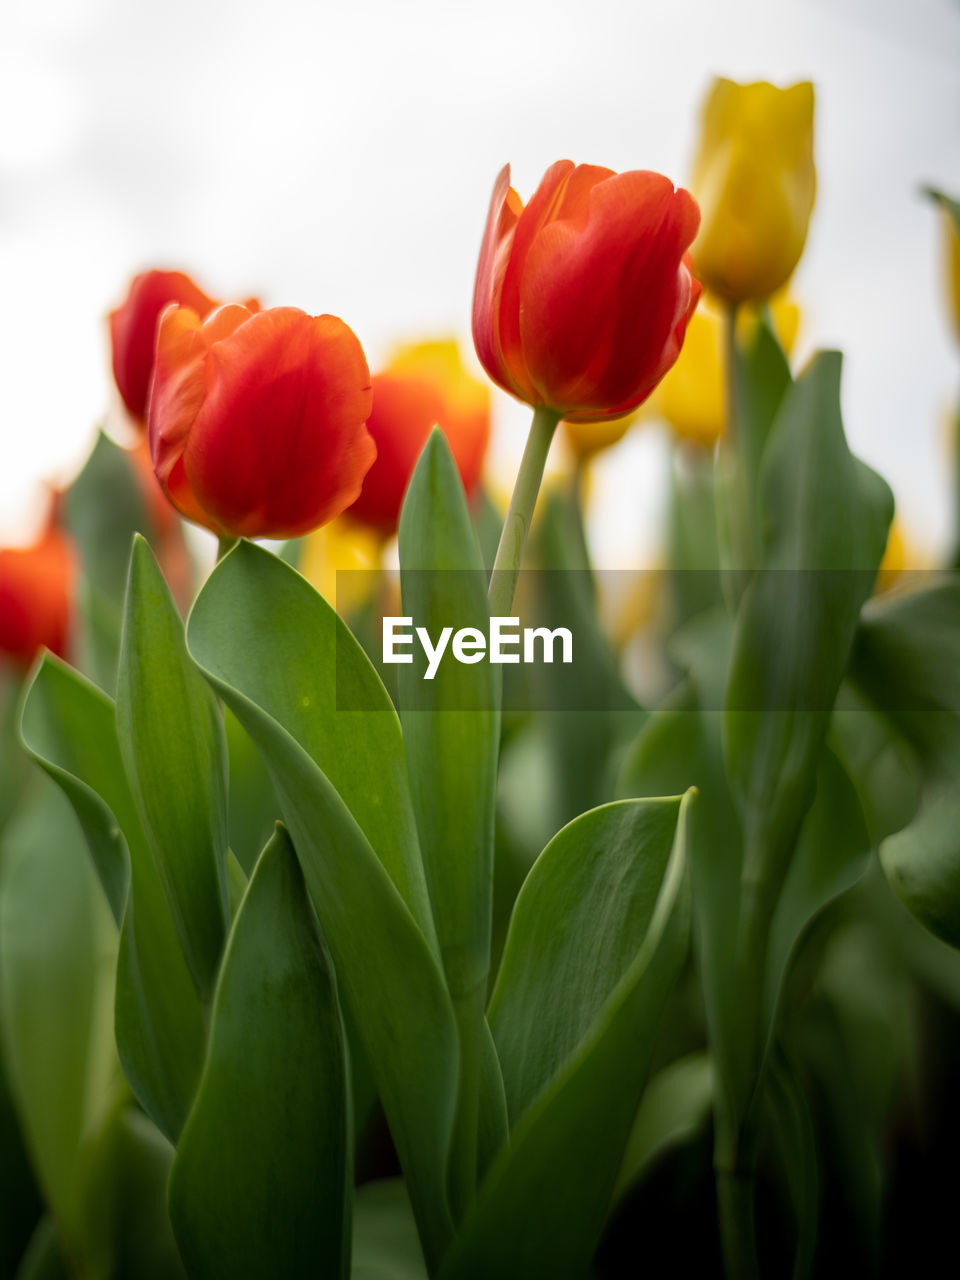 plant, flower, flowering plant, tulip, beauty in nature, freshness, nature, plant part, close-up, leaf, yellow, green, petal, flower head, red, no people, inflorescence, growth, multi colored, fragility, springtime, outdoors, vibrant color, macro photography, blossom, focus on foreground, selective focus